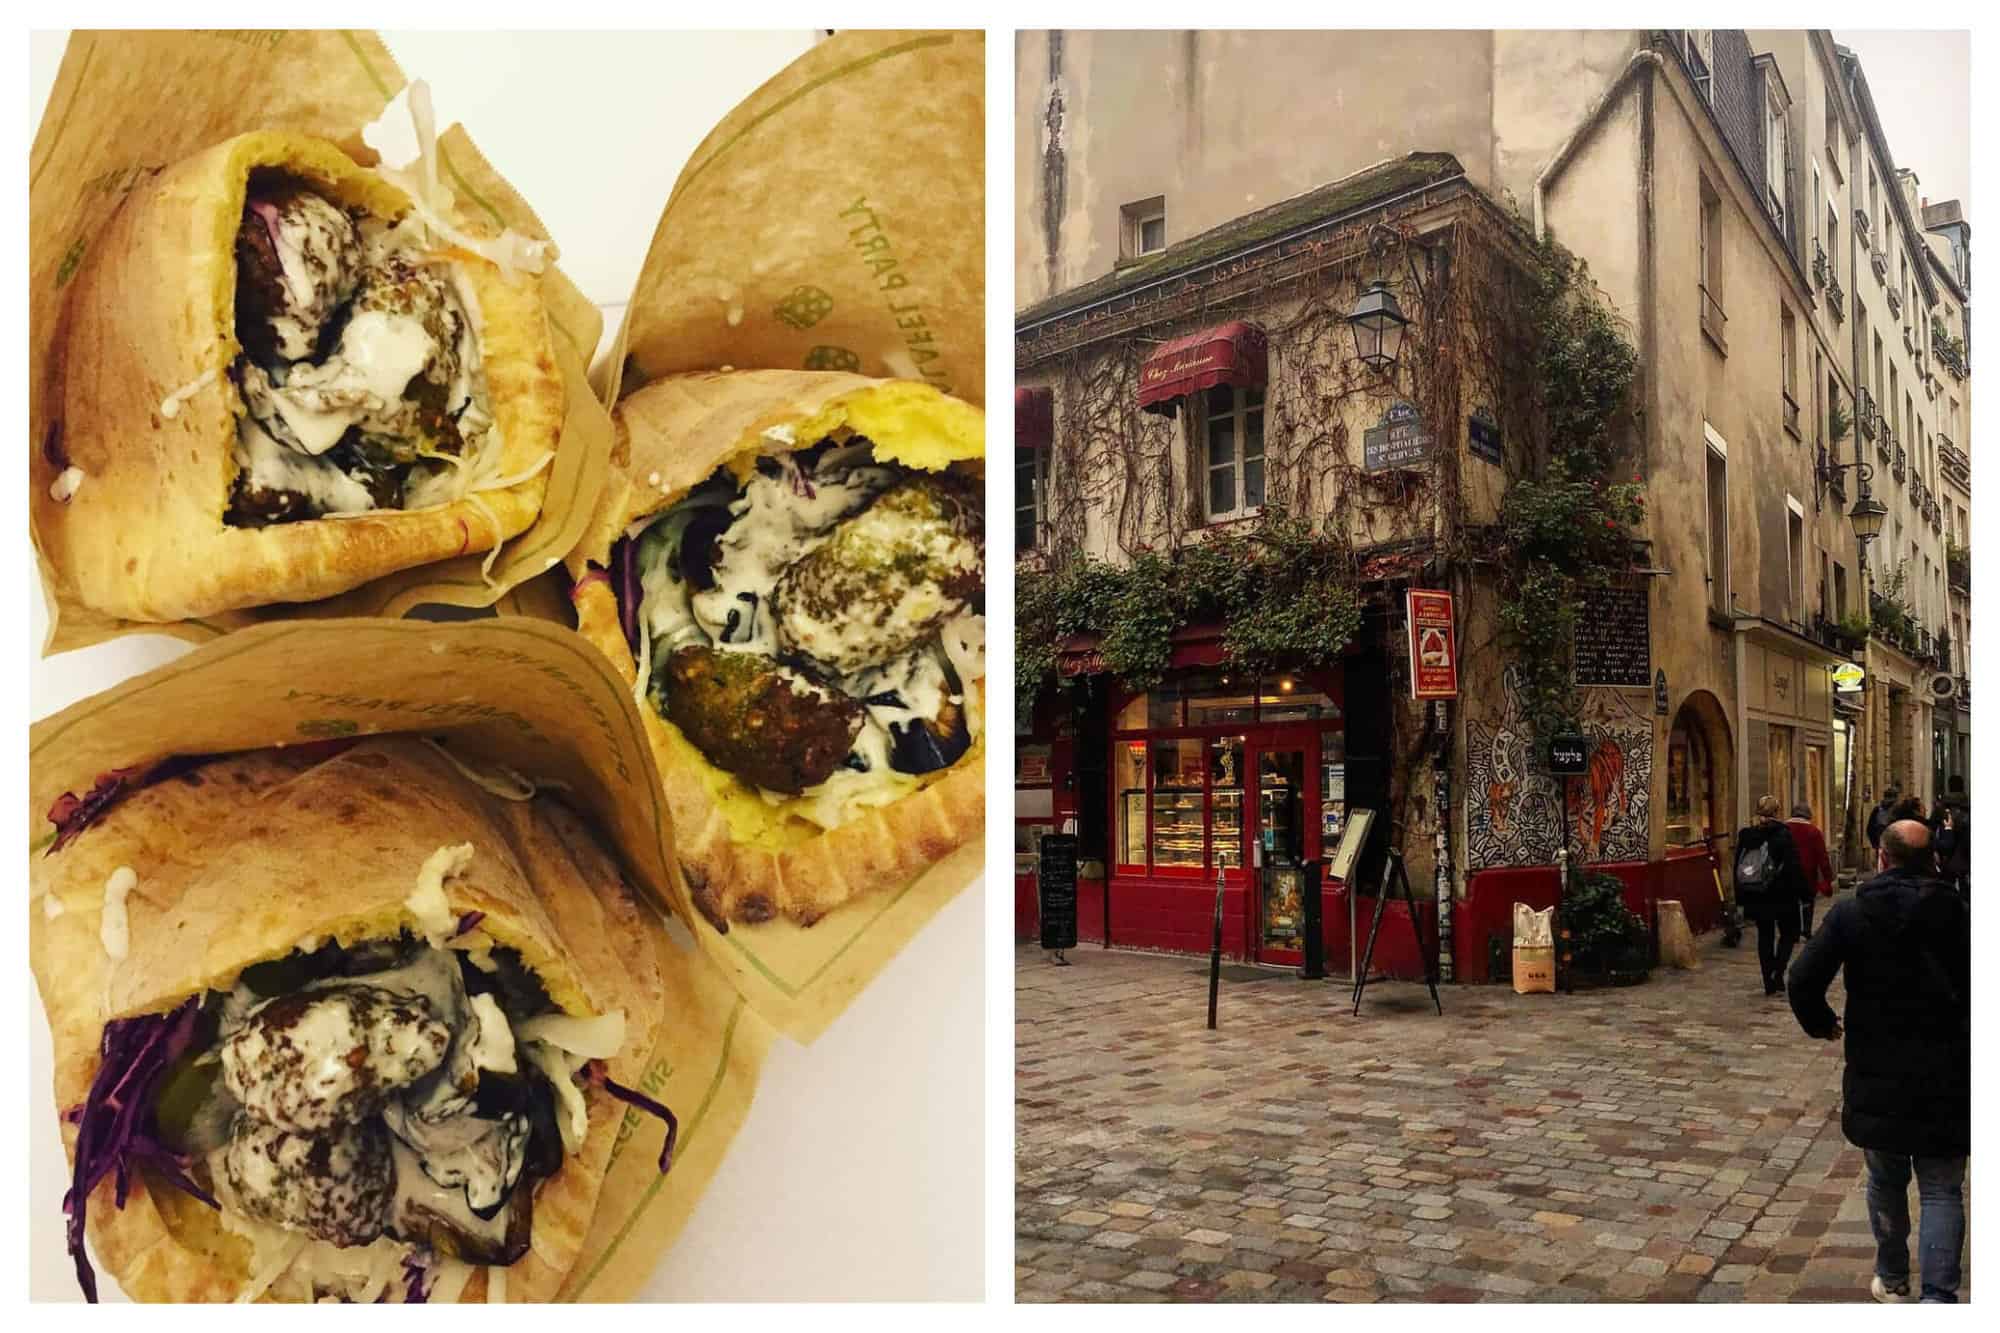 Left: close up of three falafel-stuffed pita bread from Pitzman, Right: rainy day view of corners on Rue des Rosiers and red shop with vines growing